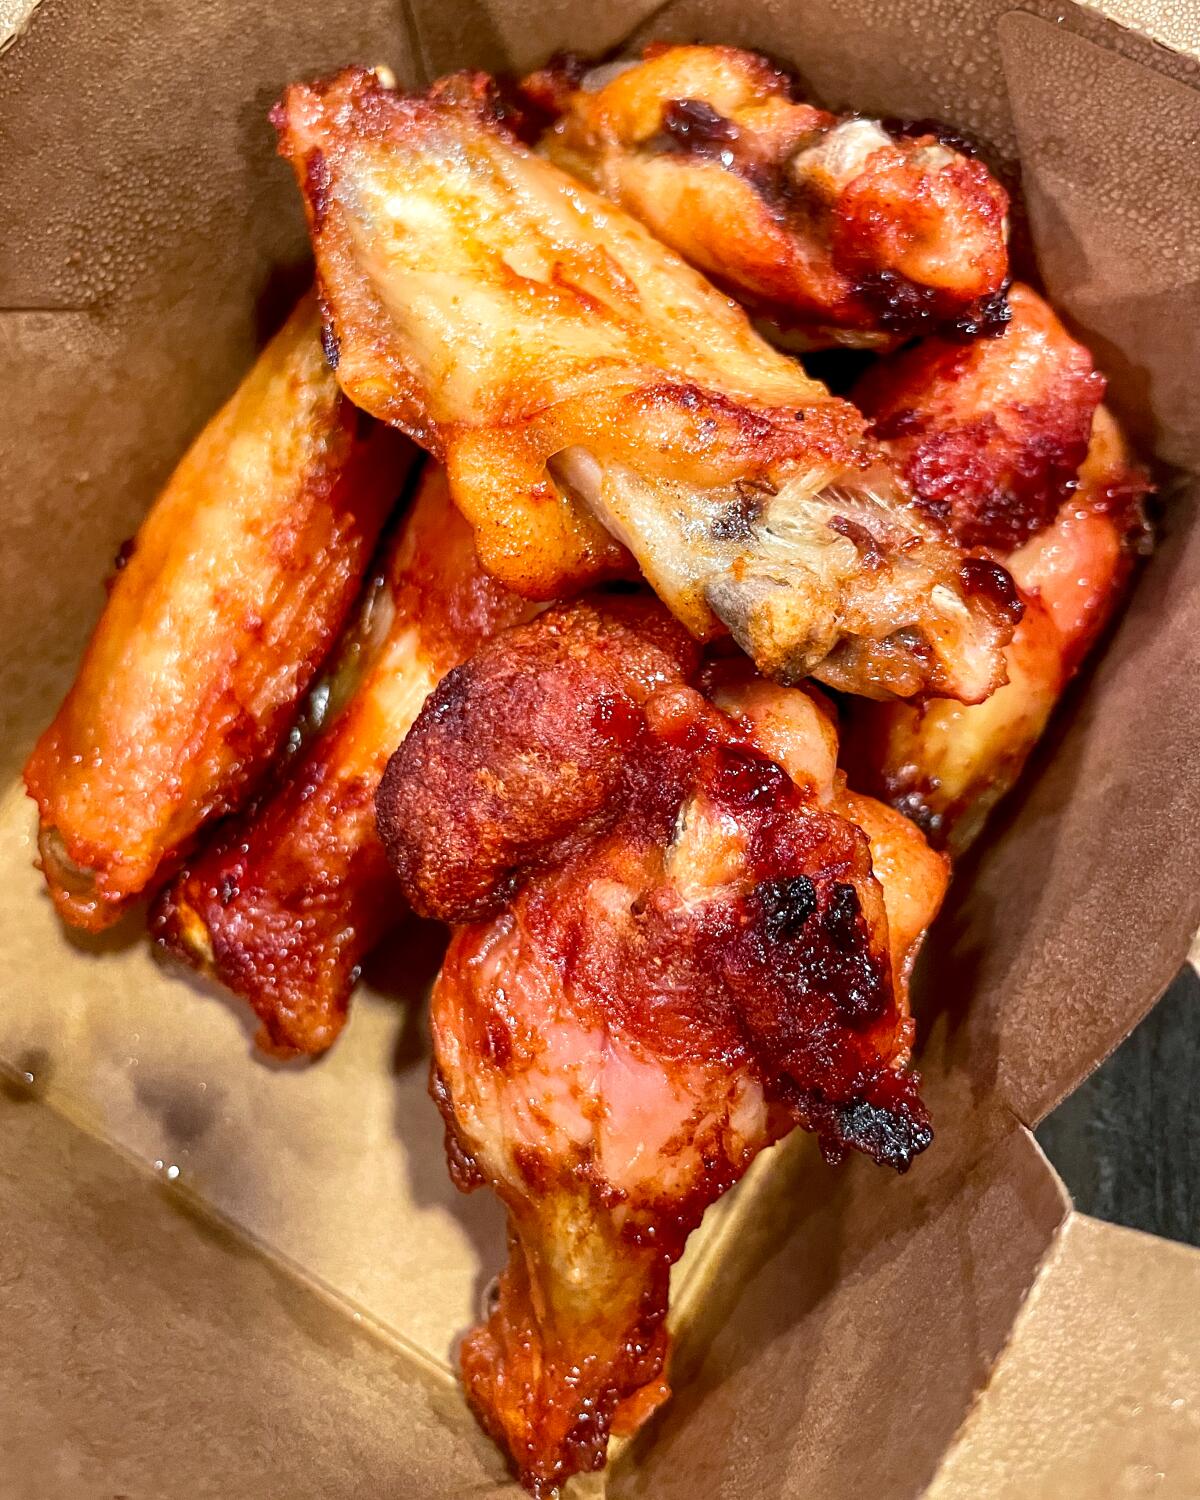 New Orleans-style chicken wings.